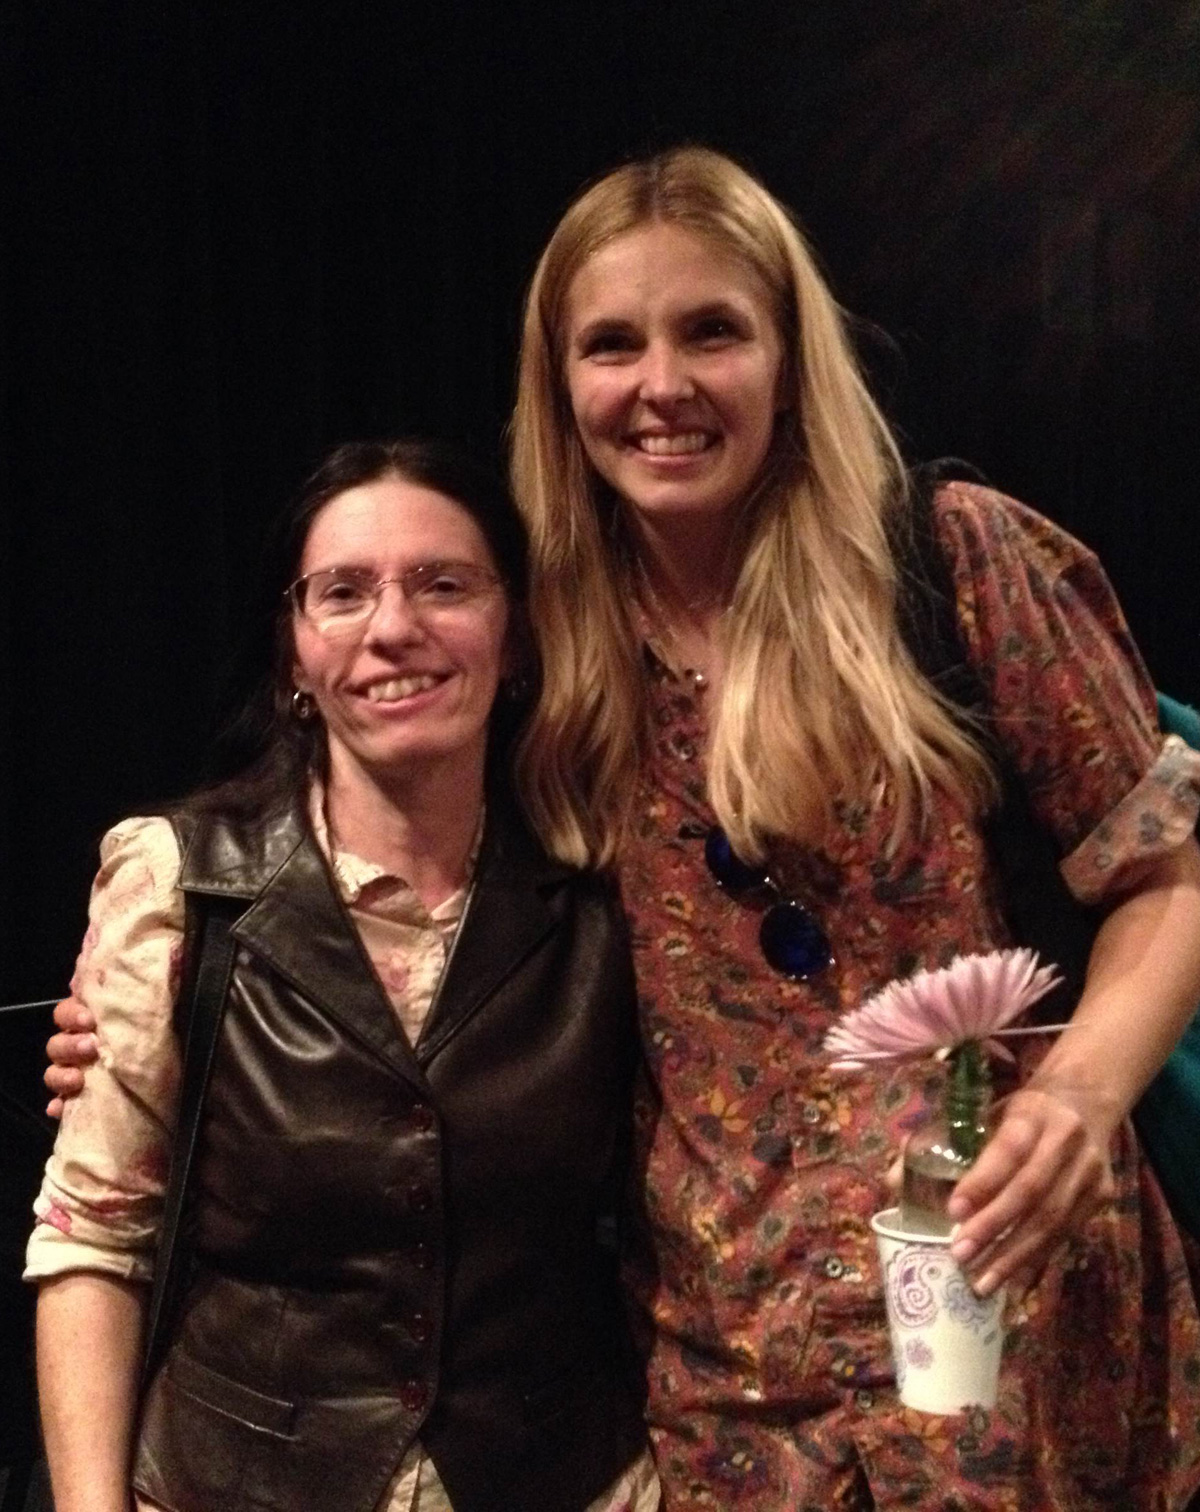 Willow Polson and Claudia Pickering at the preview screening of Frisky, March 2015.